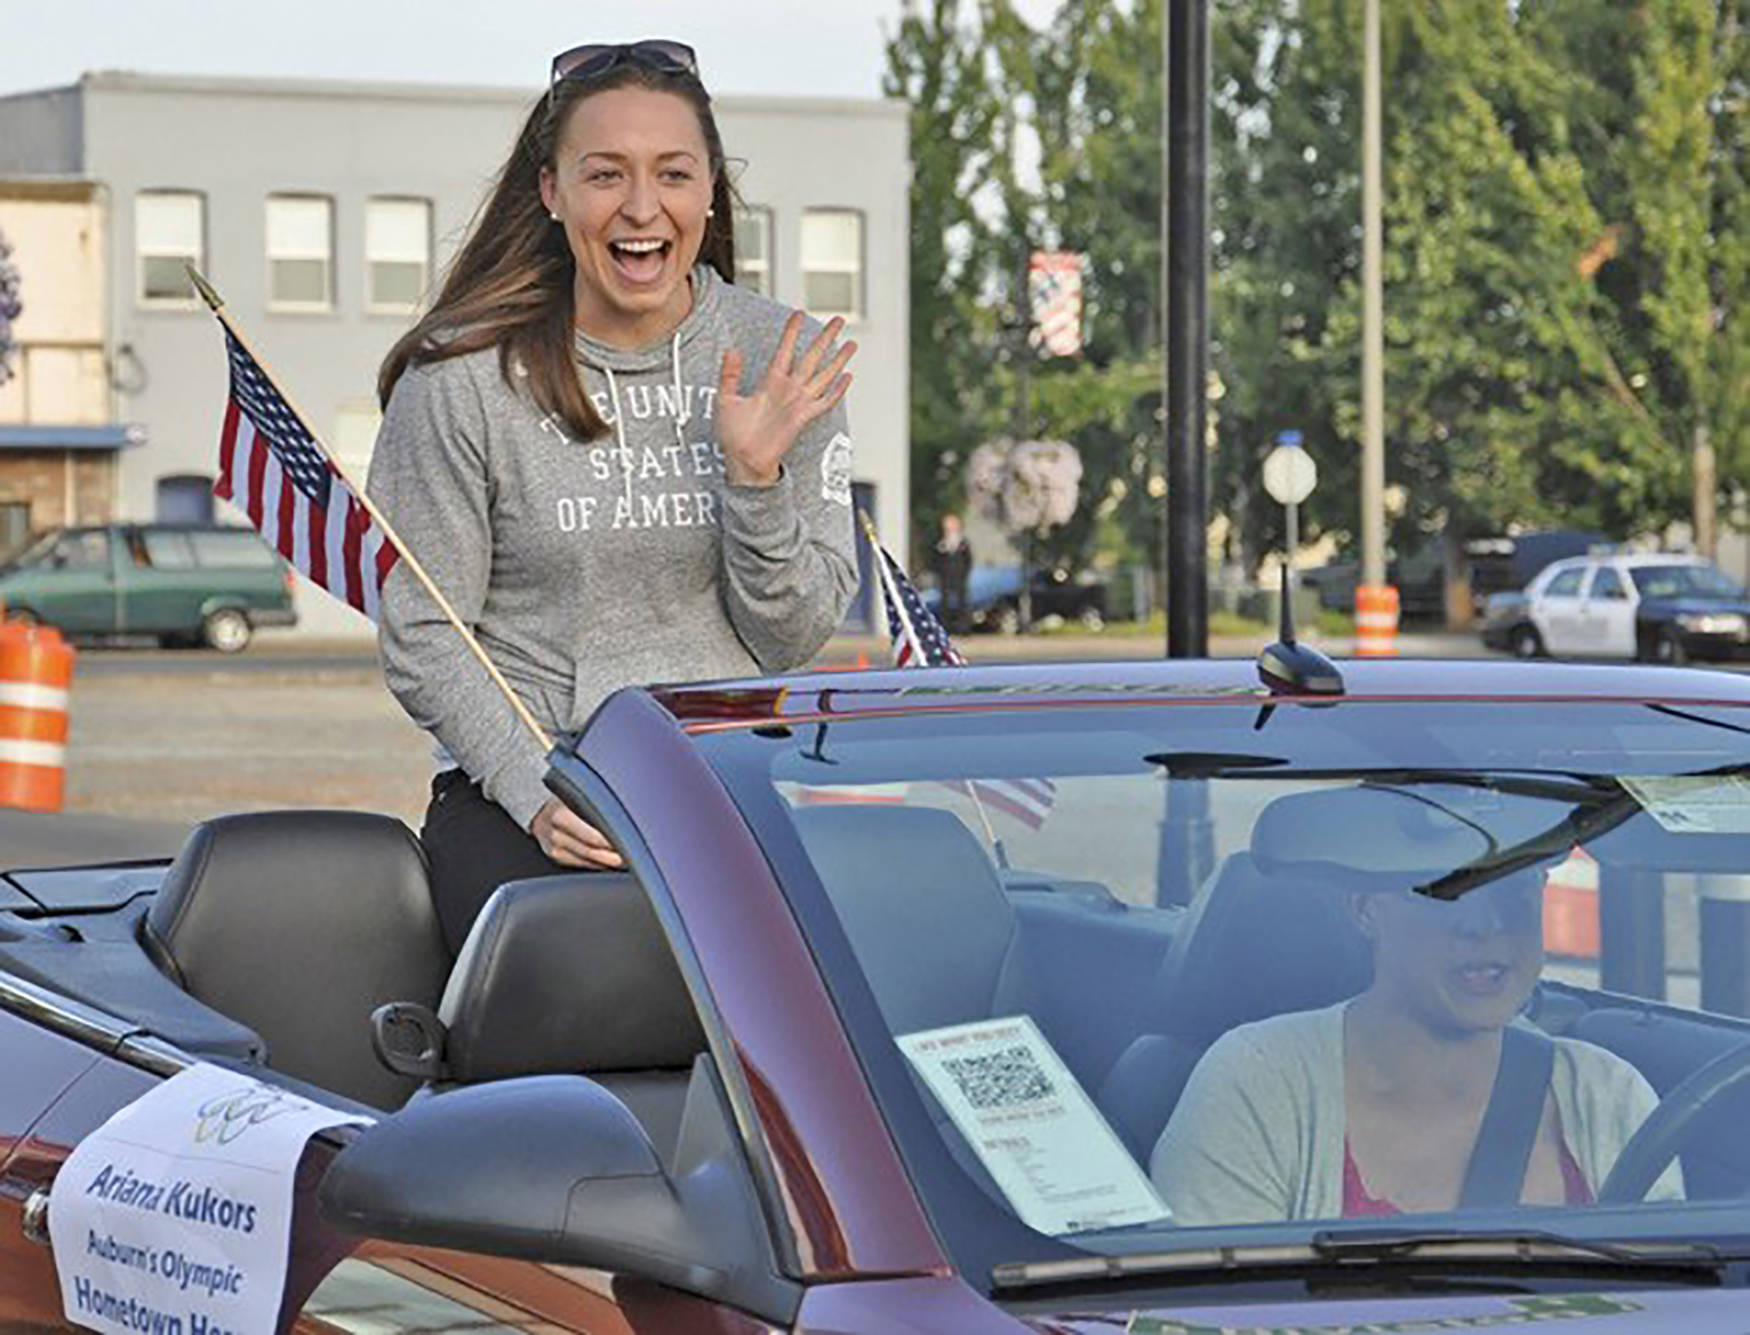 Auburn’s own Ariana Kukors came home following the 2012 London Games to a city celebration and downtown parade. RACHEL CIAMPI, Auburn Reporter